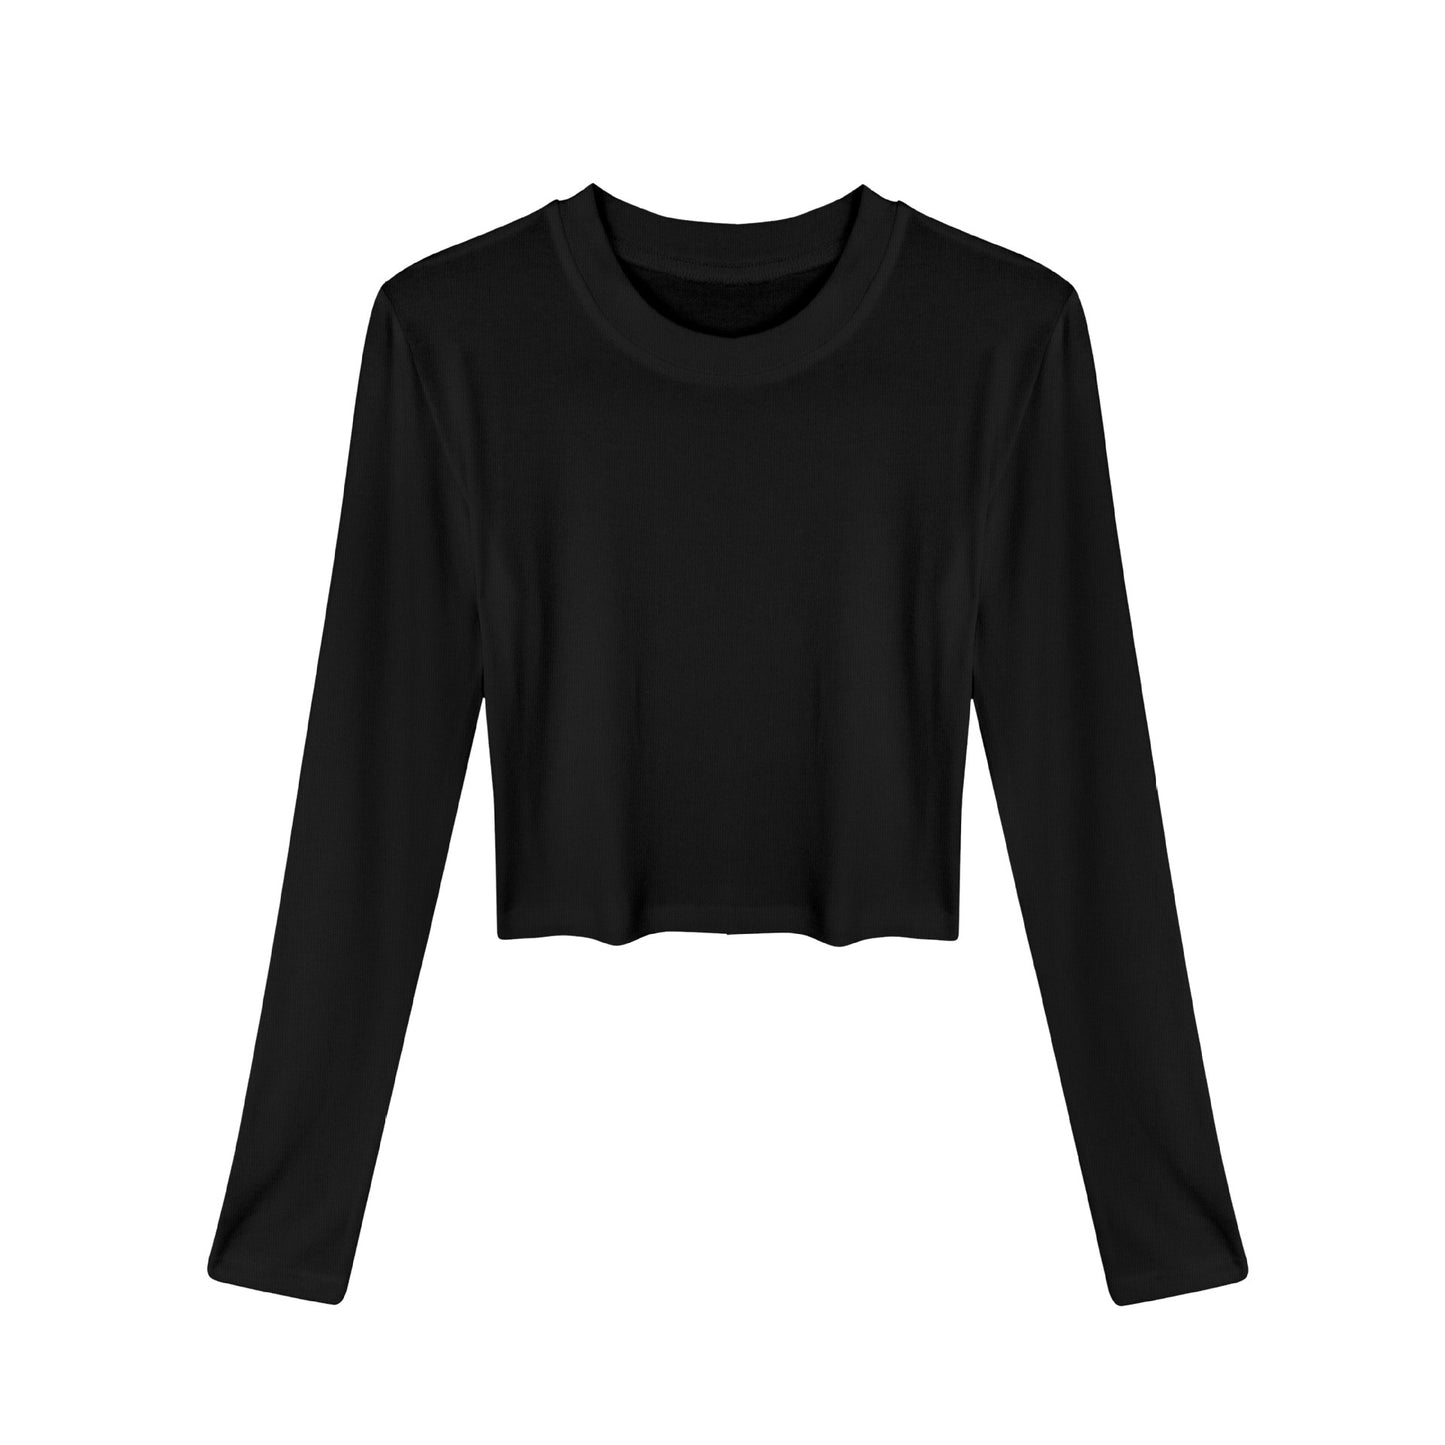 Women's Fashion Solid Color Lining Stretch Tops